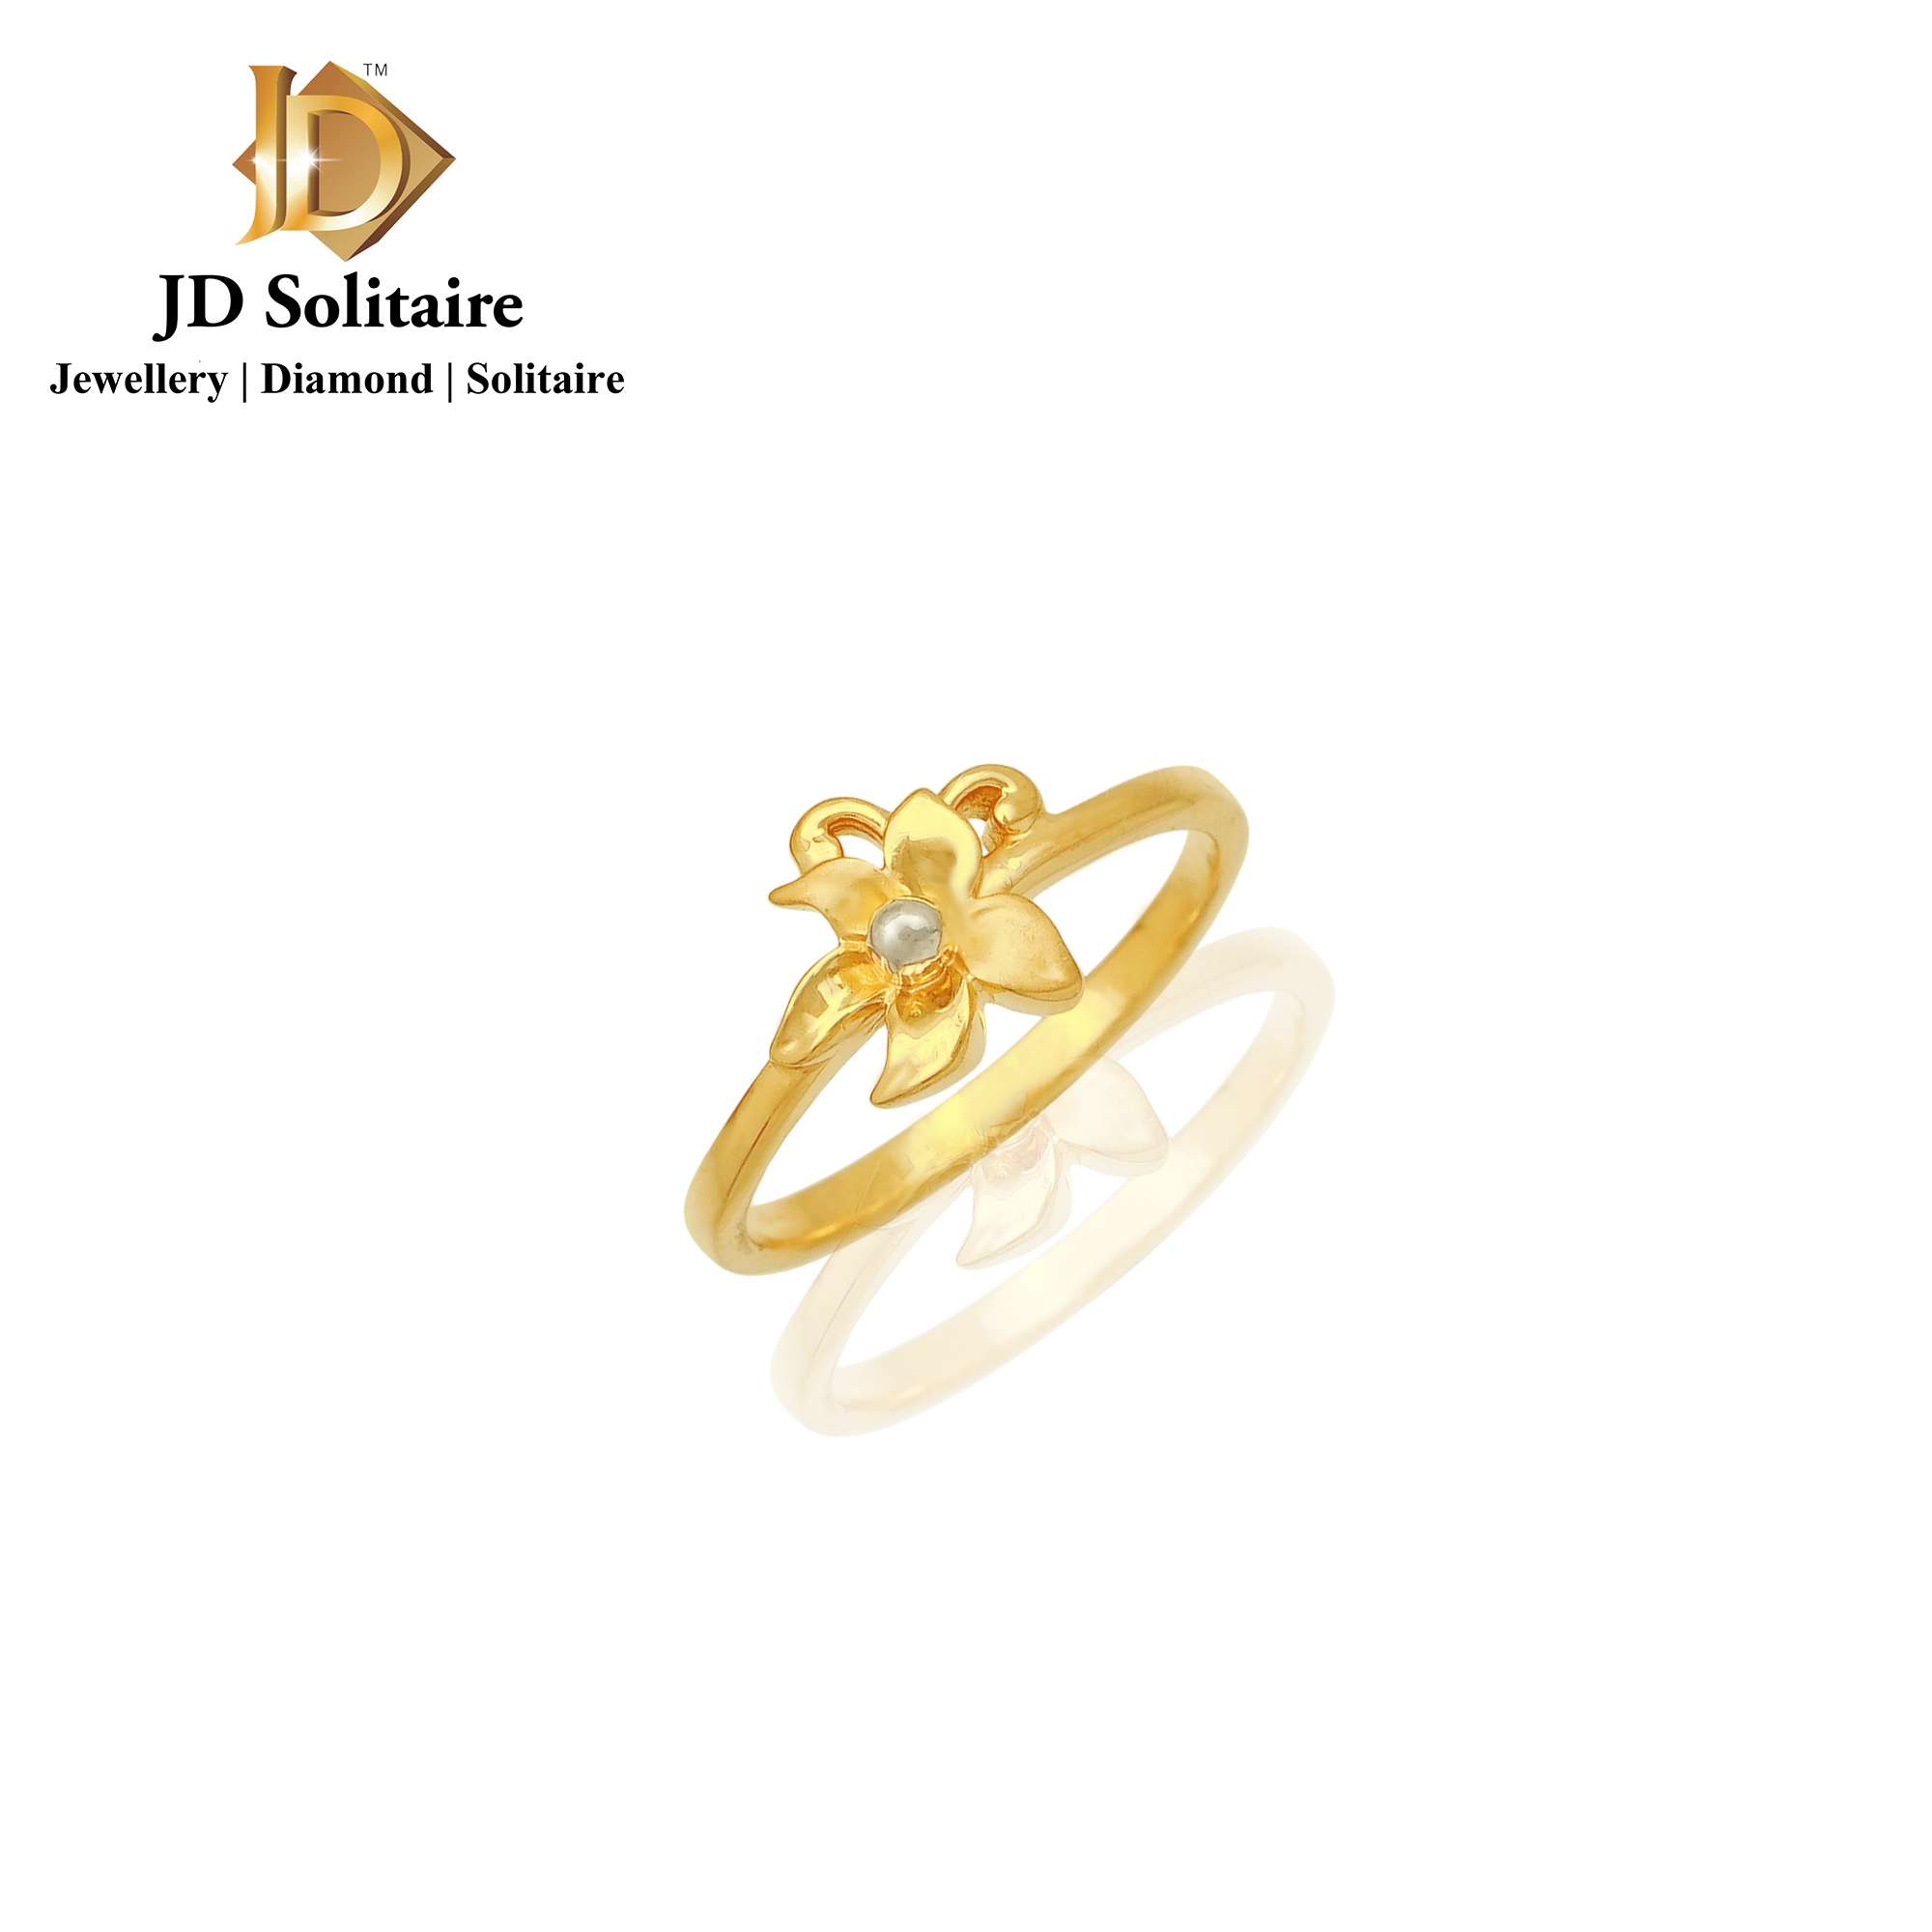 Buy Latest Impon Real Gold Design White Stone Small Size One Gram Gold  Stone Ring for Girls